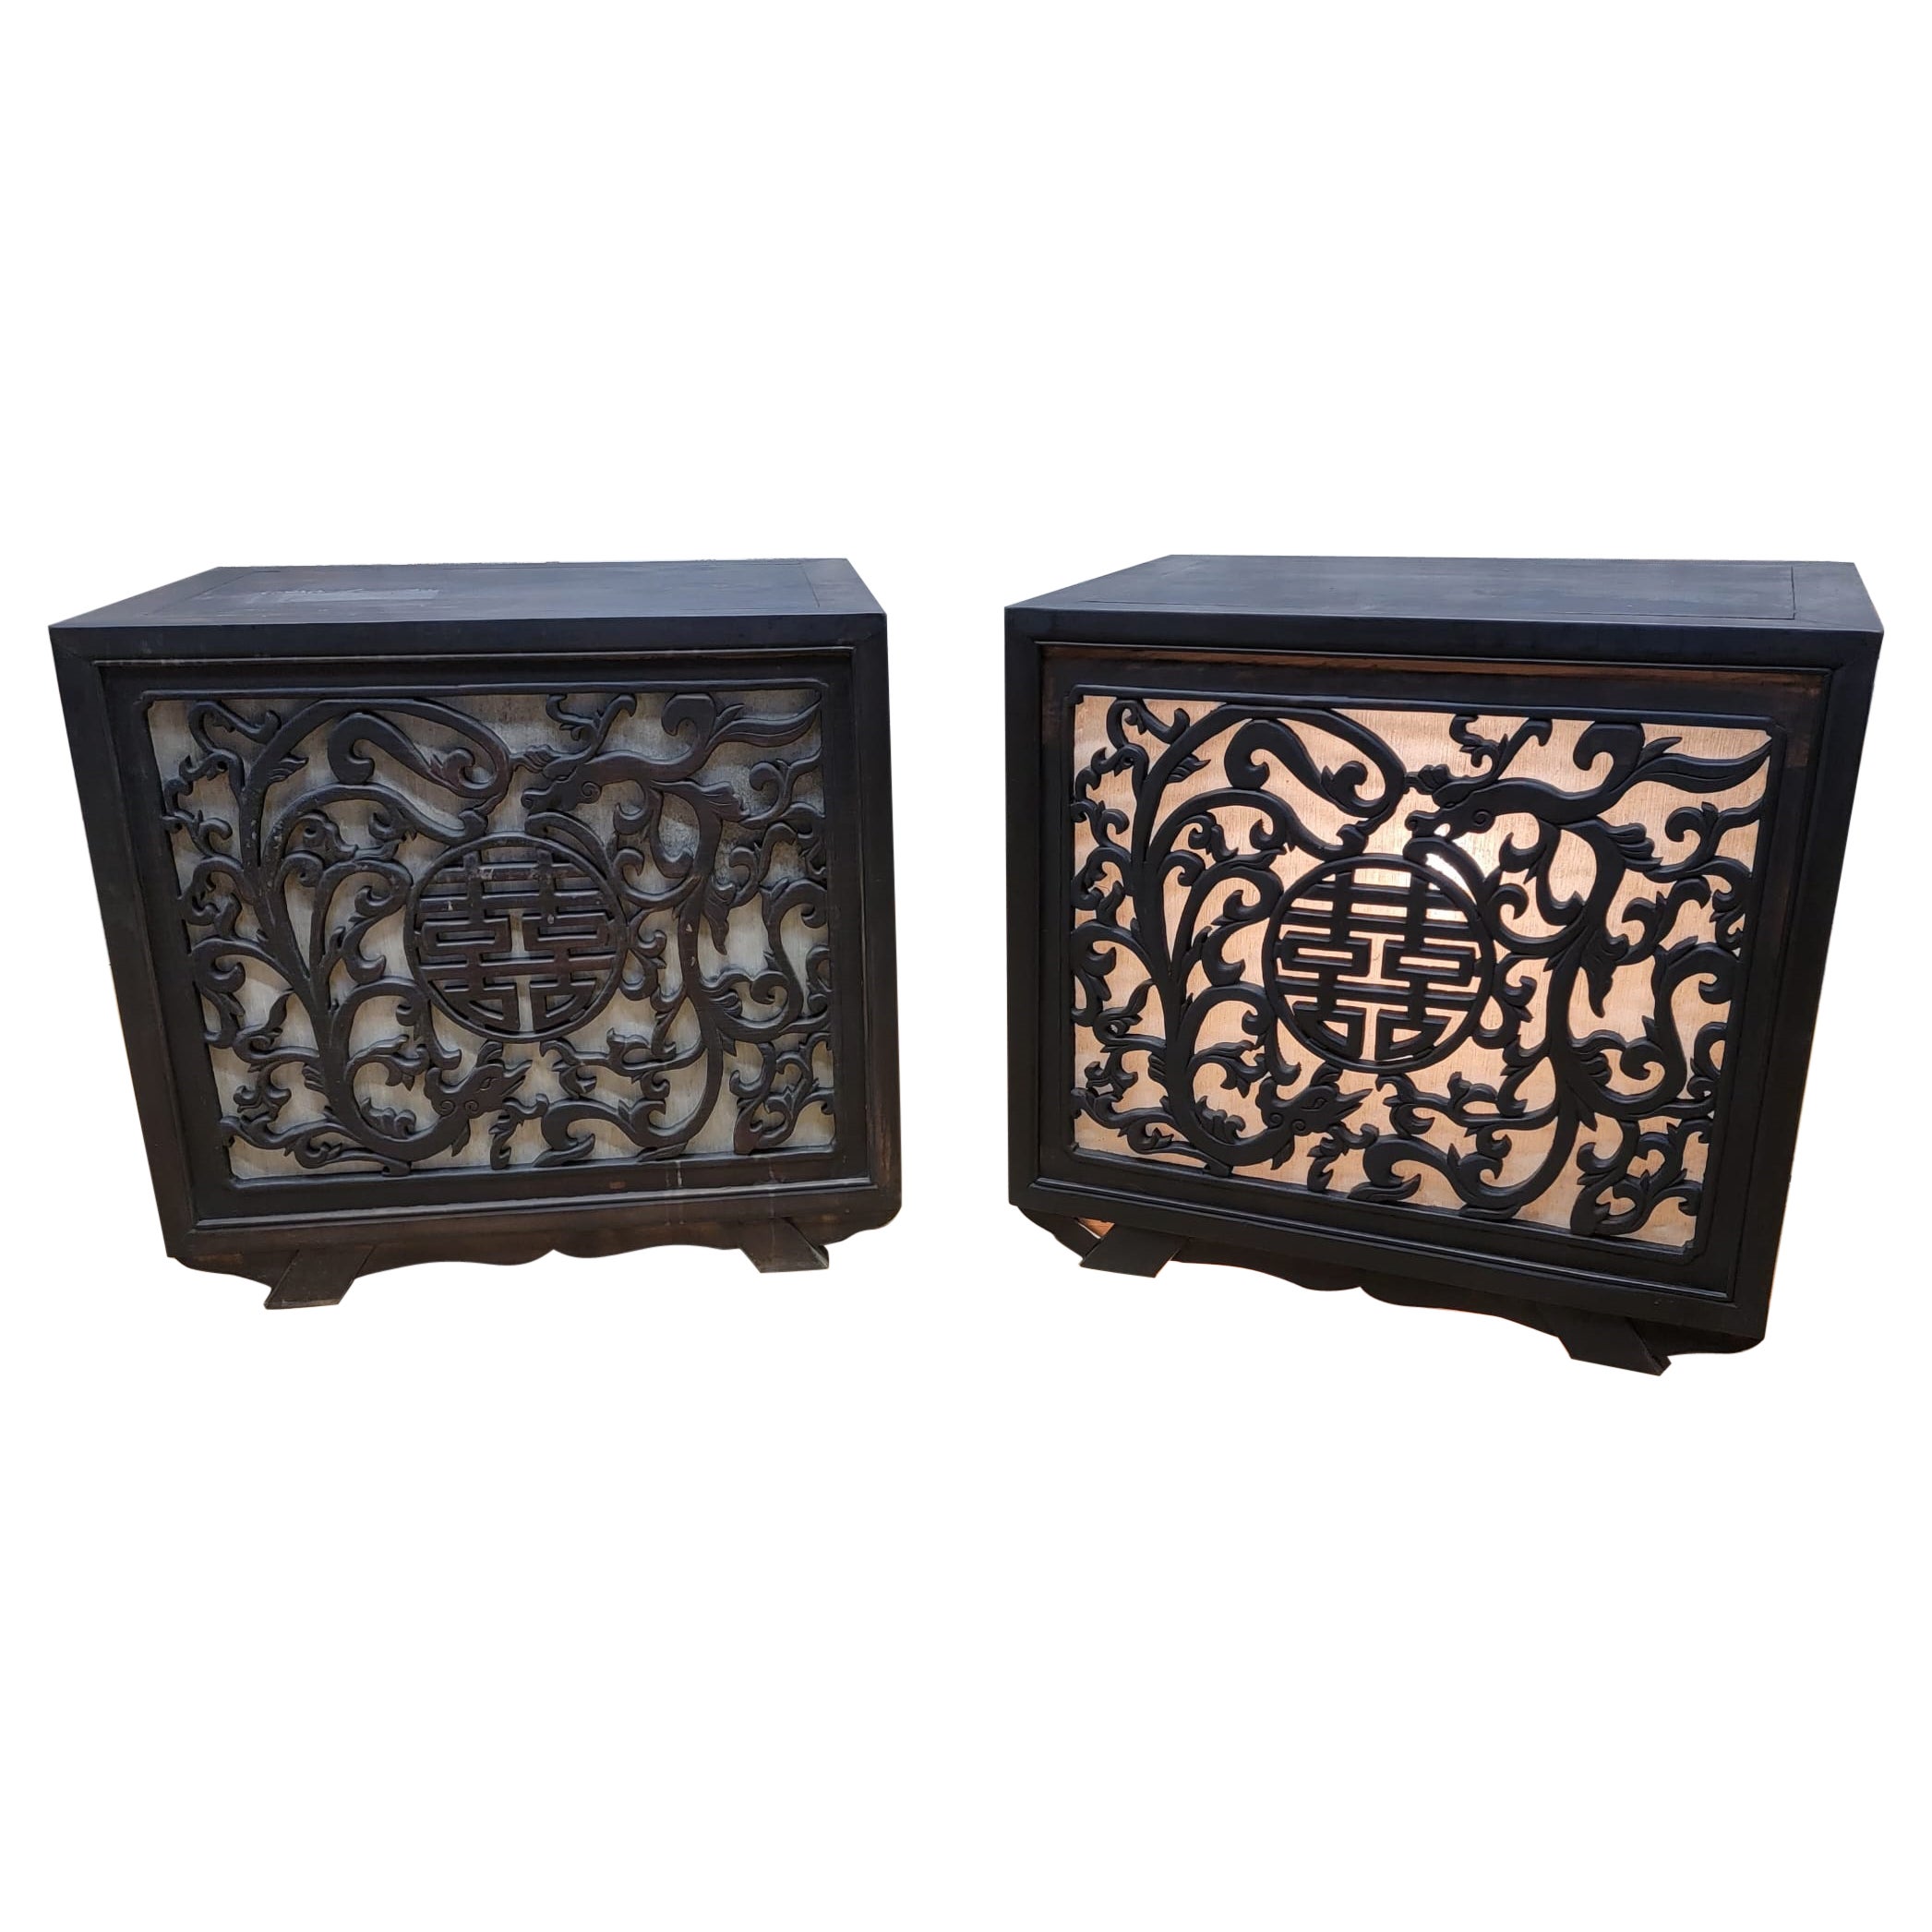 Vintage Chinese Carved Decorative Elm Side Tables with Light - Pair For Sale